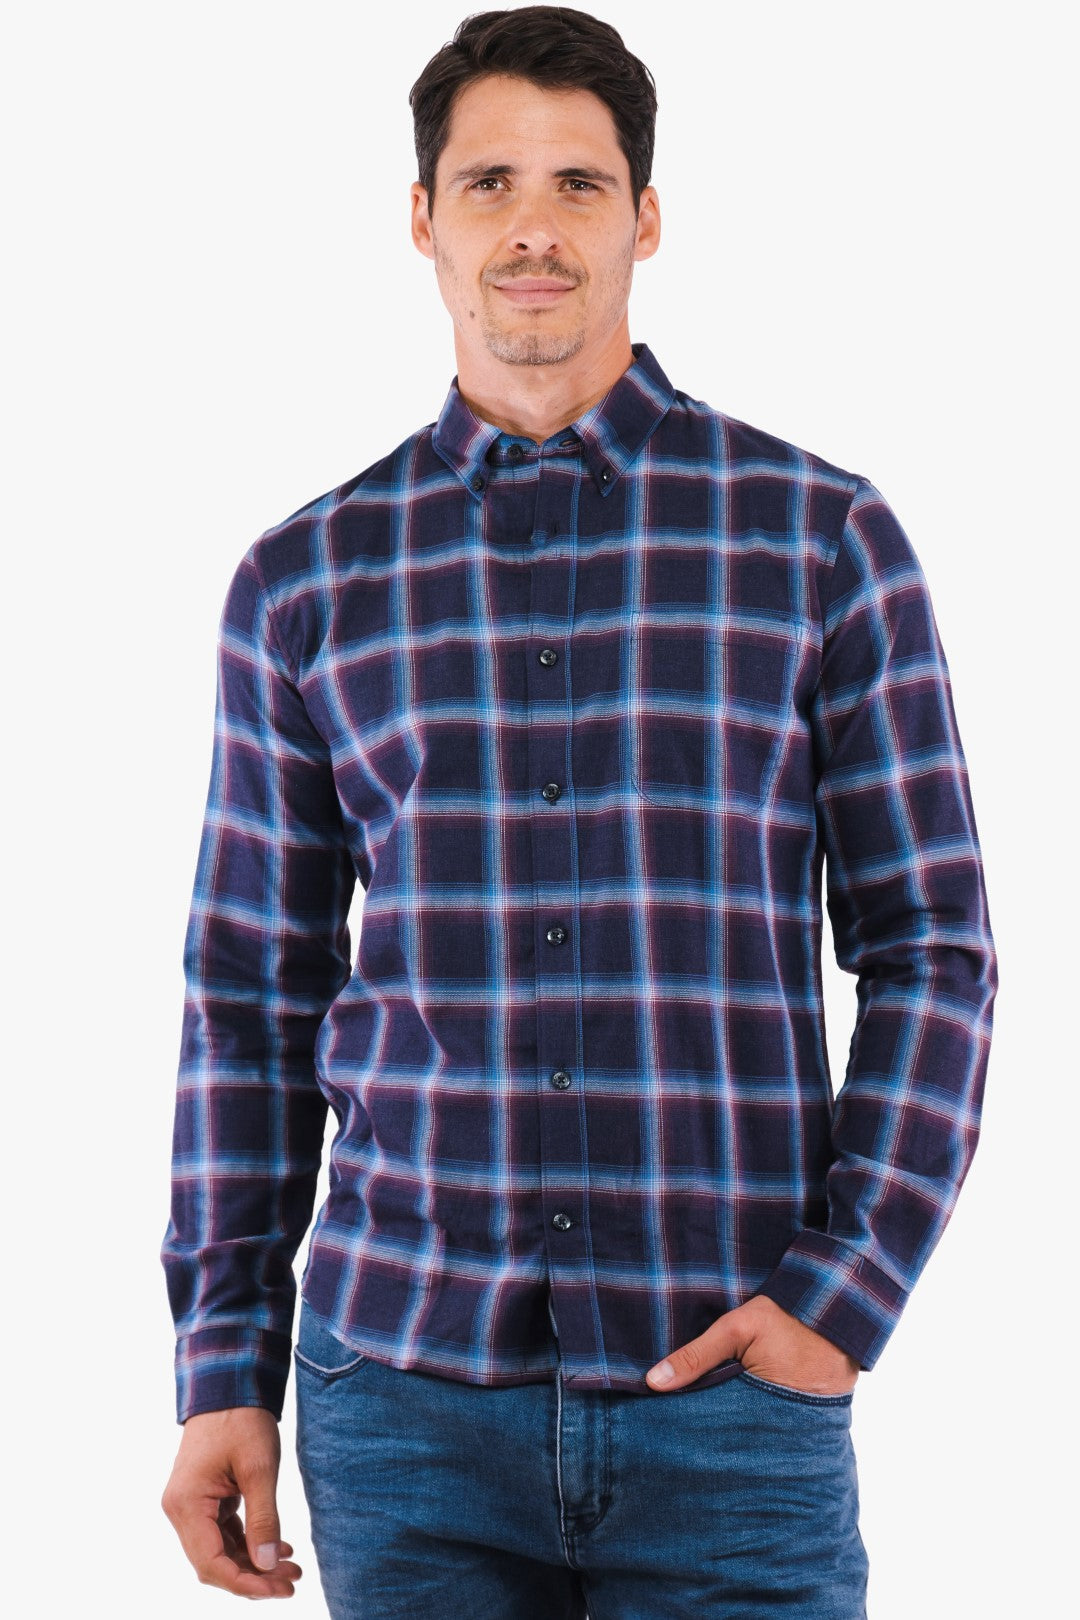 Matinique shirt in Navy color